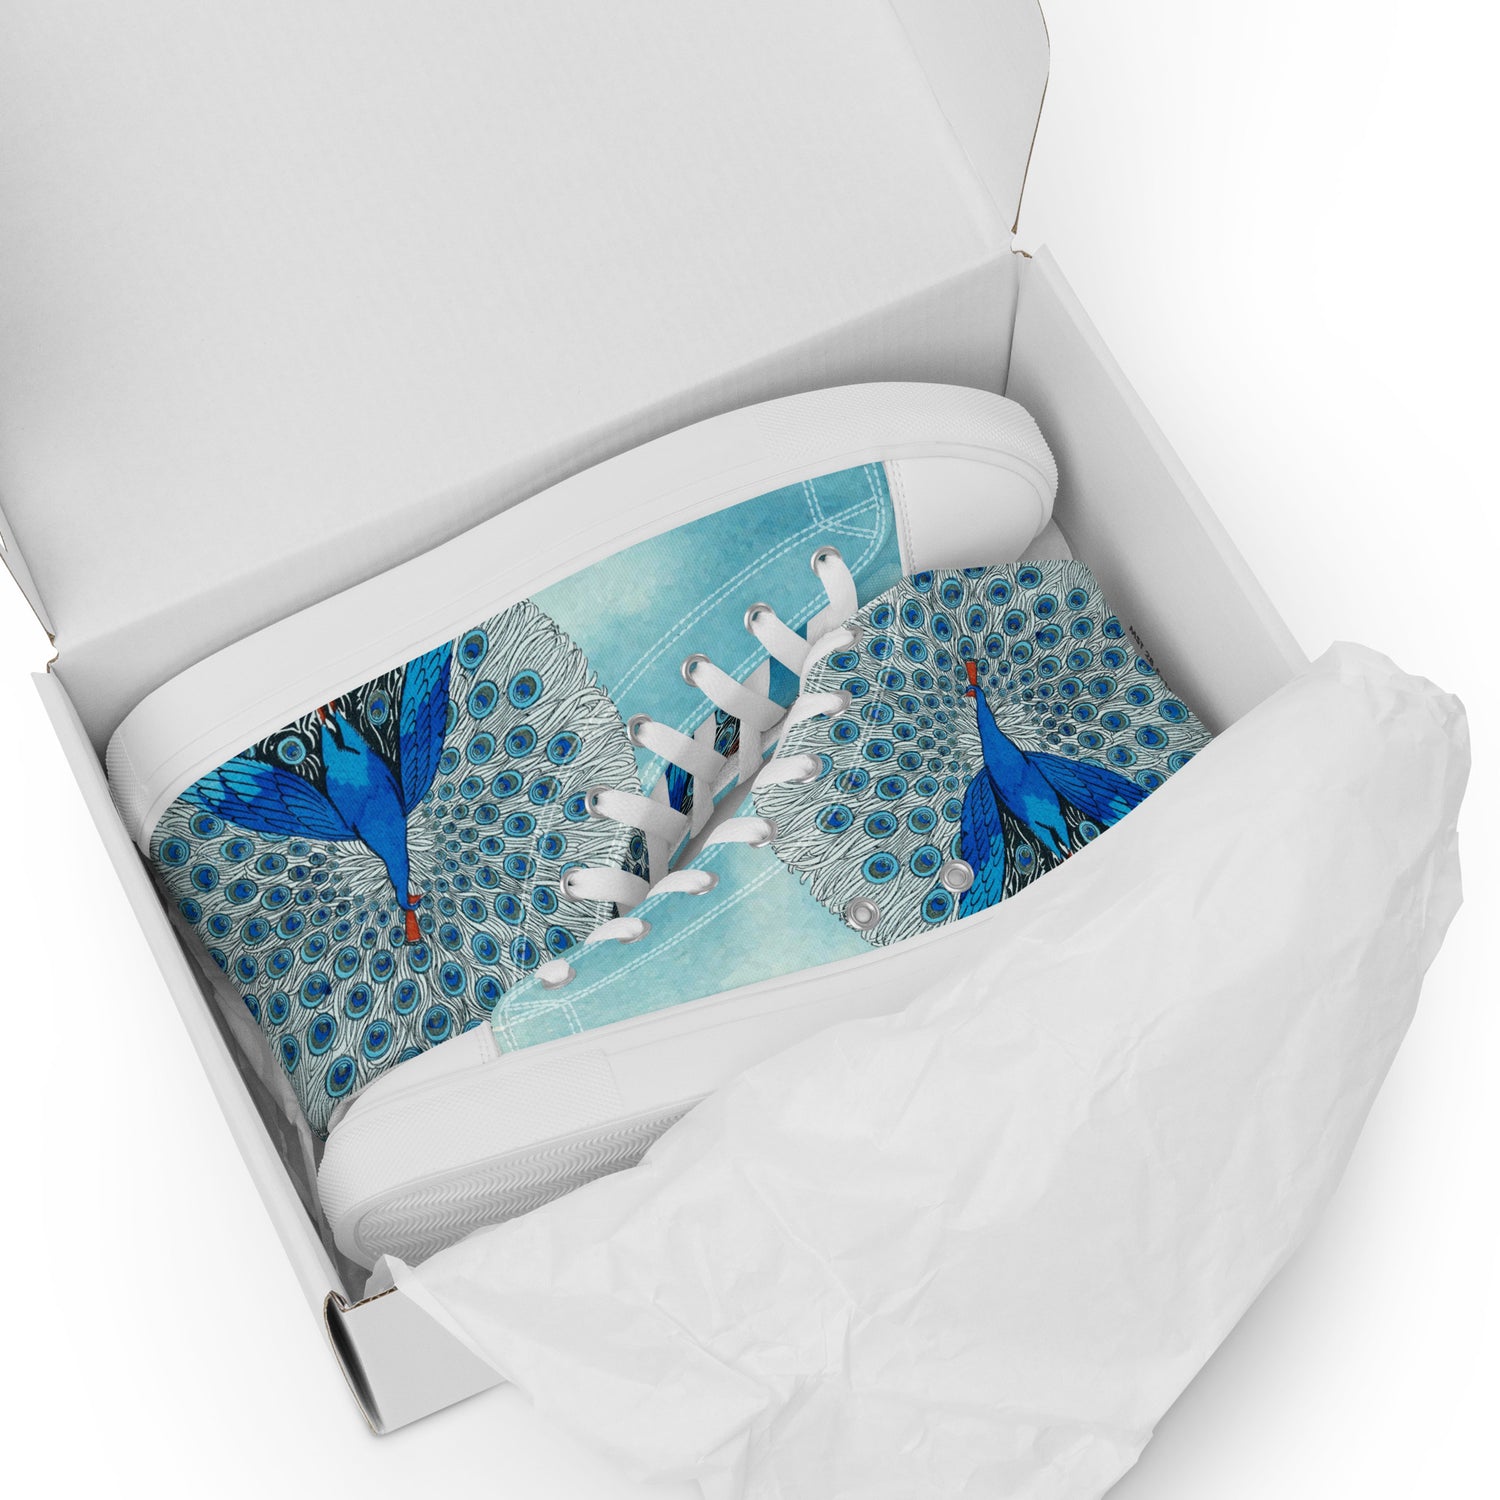 Cloud Blue Shoes with a Blue and White Peacock Print